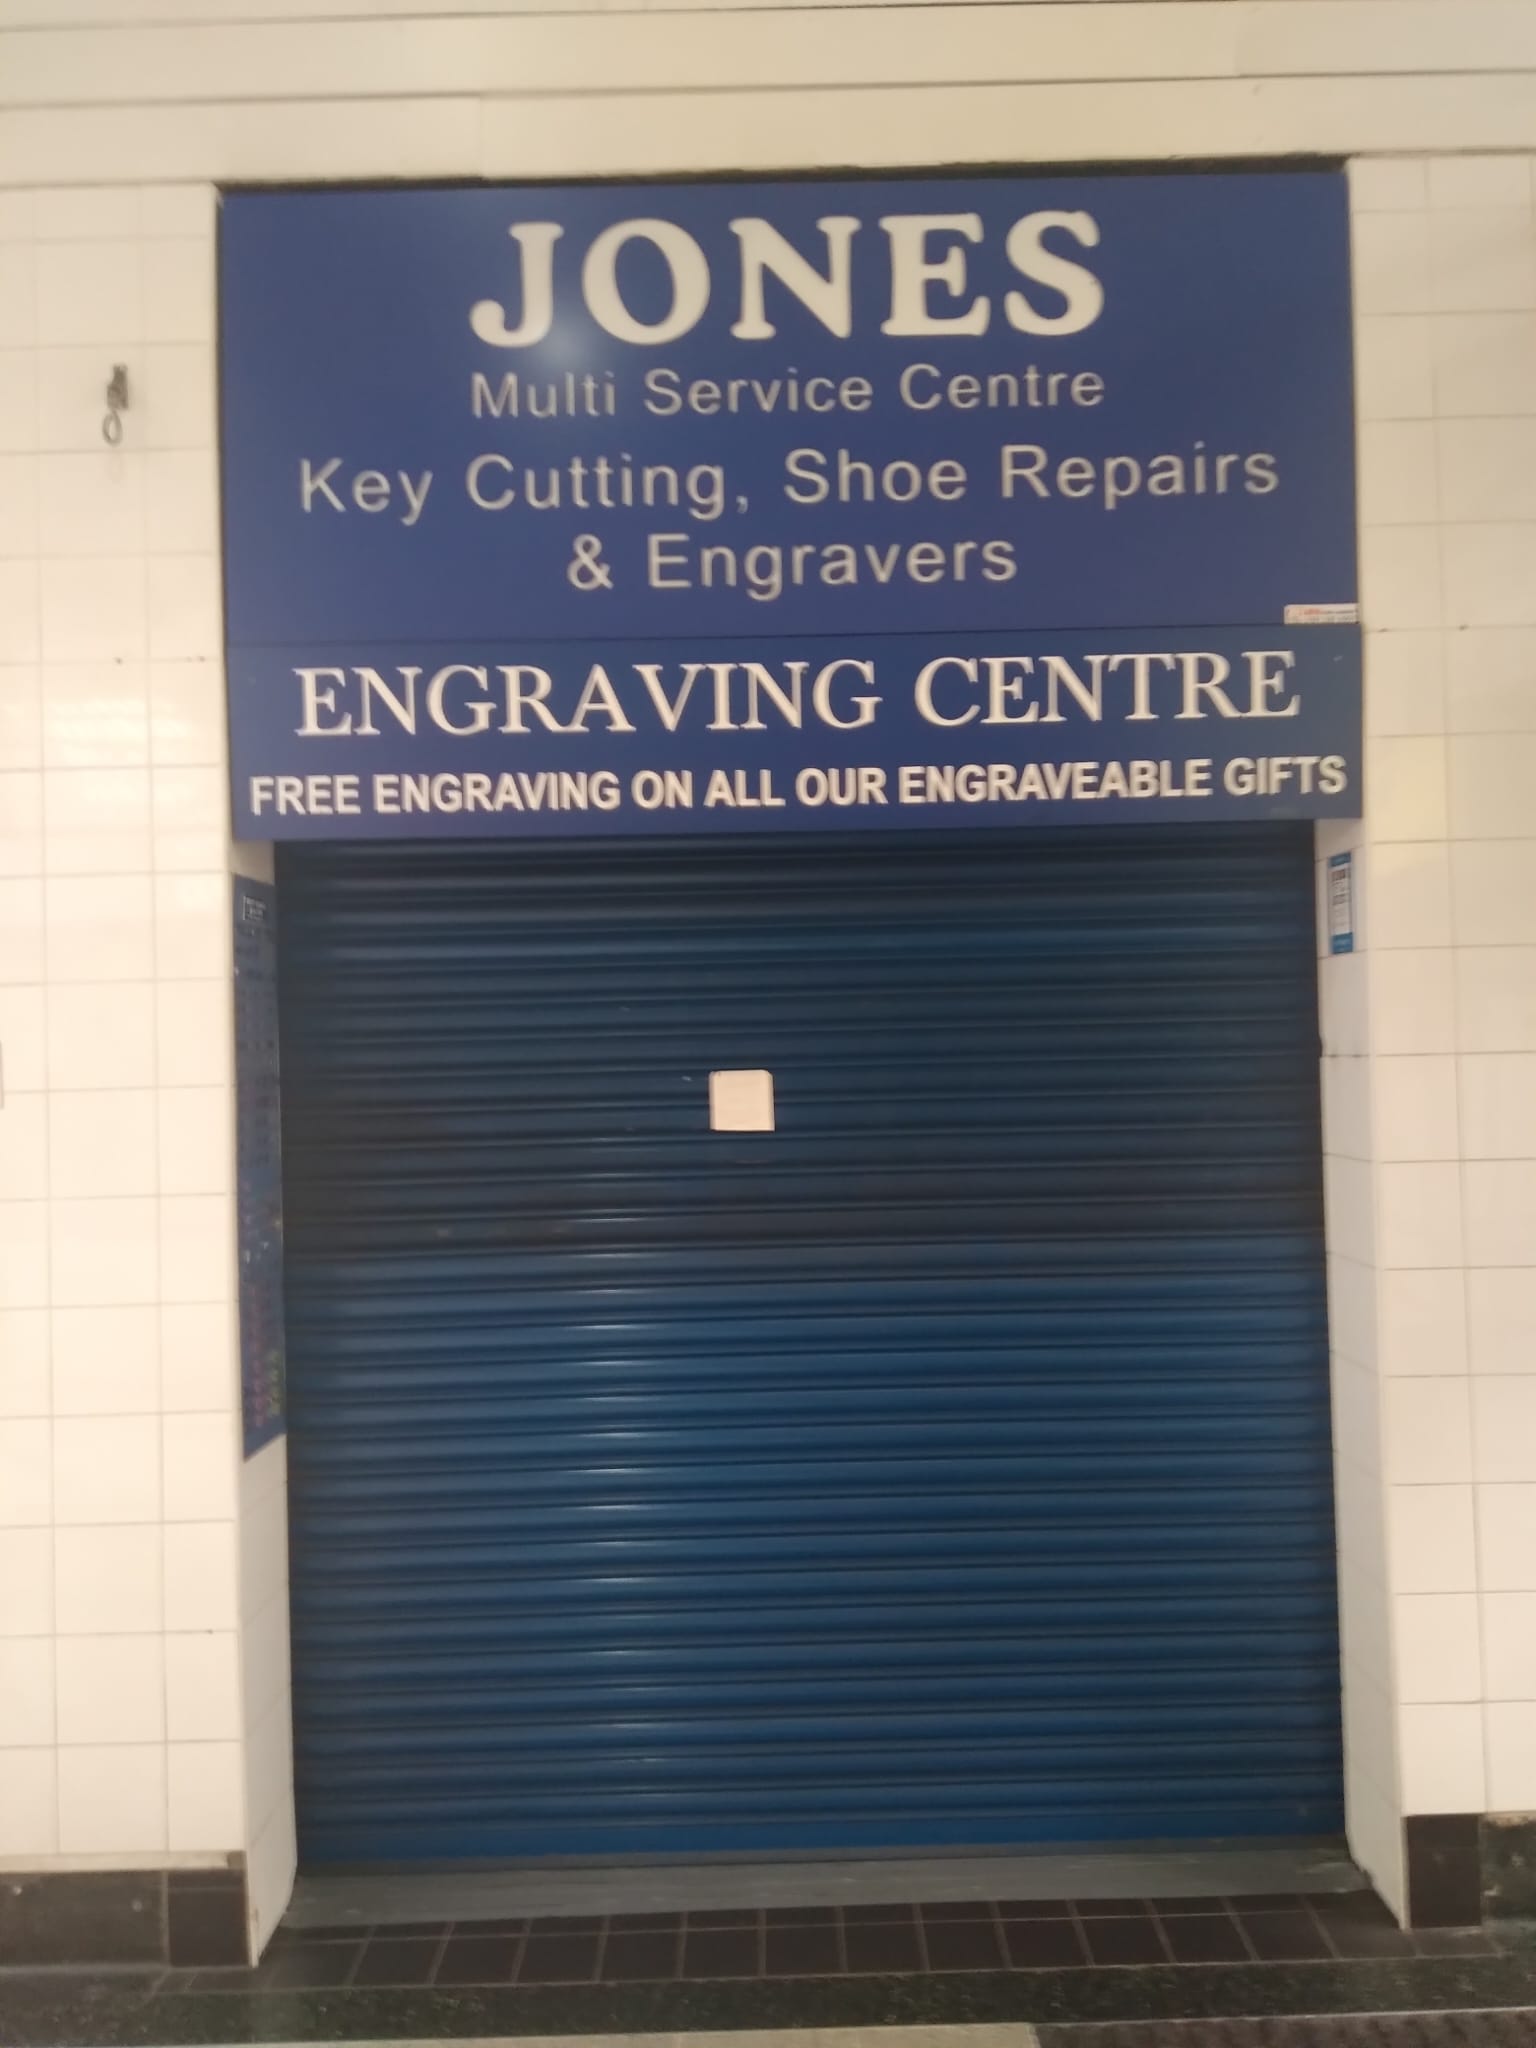 Jones Multiservice Centre in Kings Square will be closed today